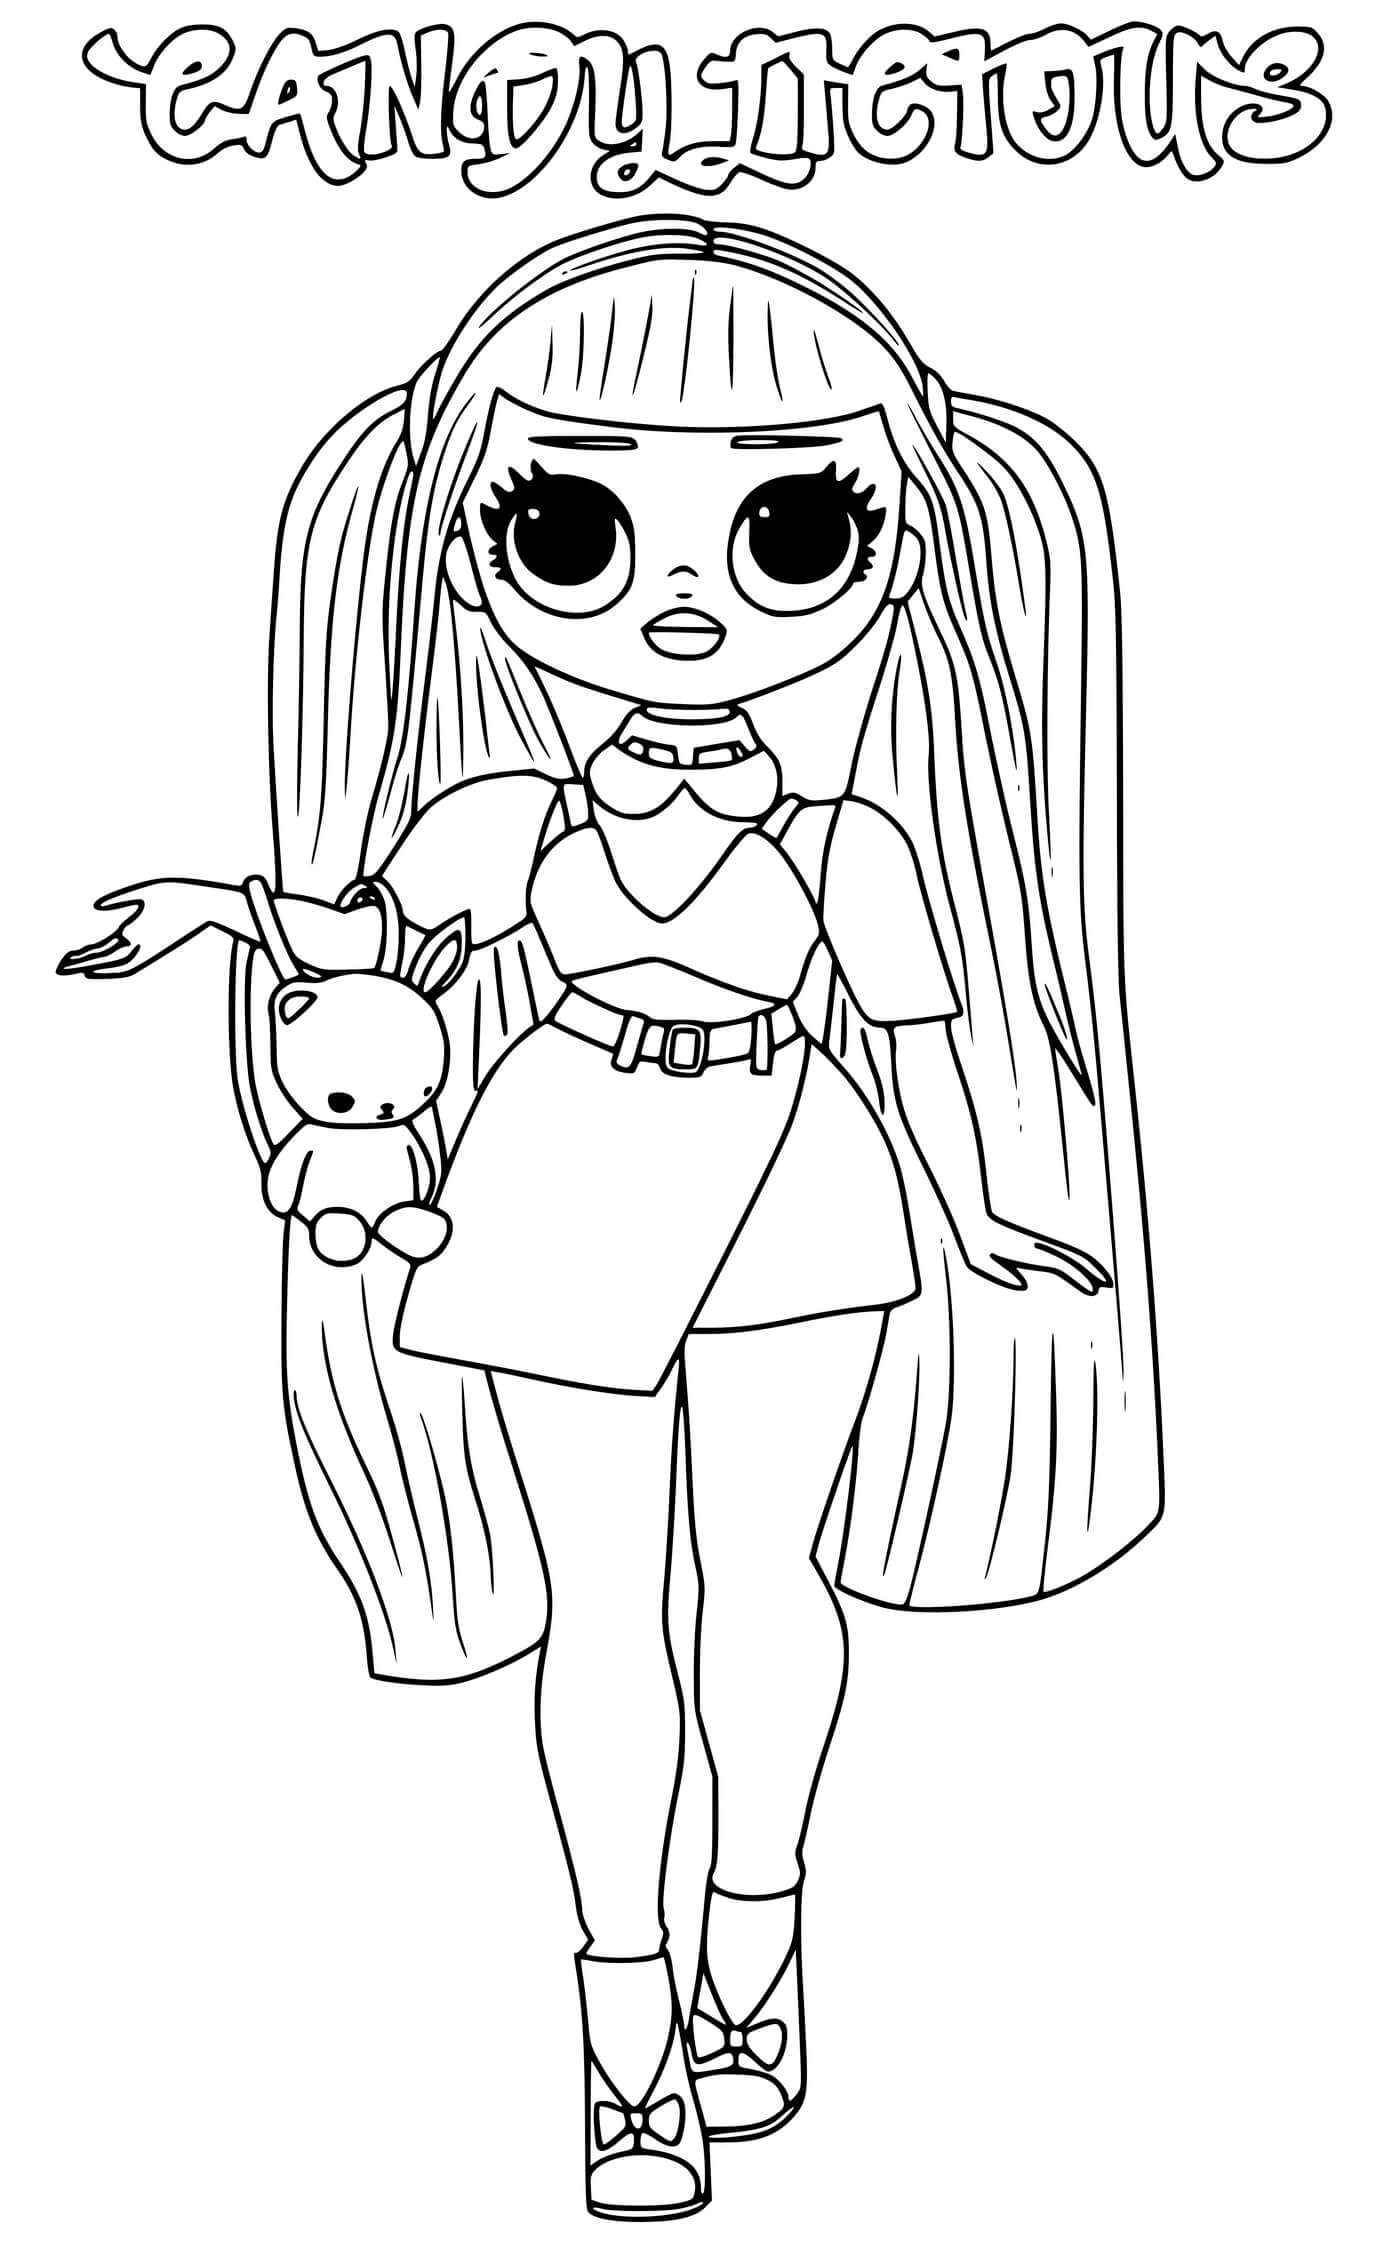 Candylicious Lol Omg Coloring Pages   Coloring Cool